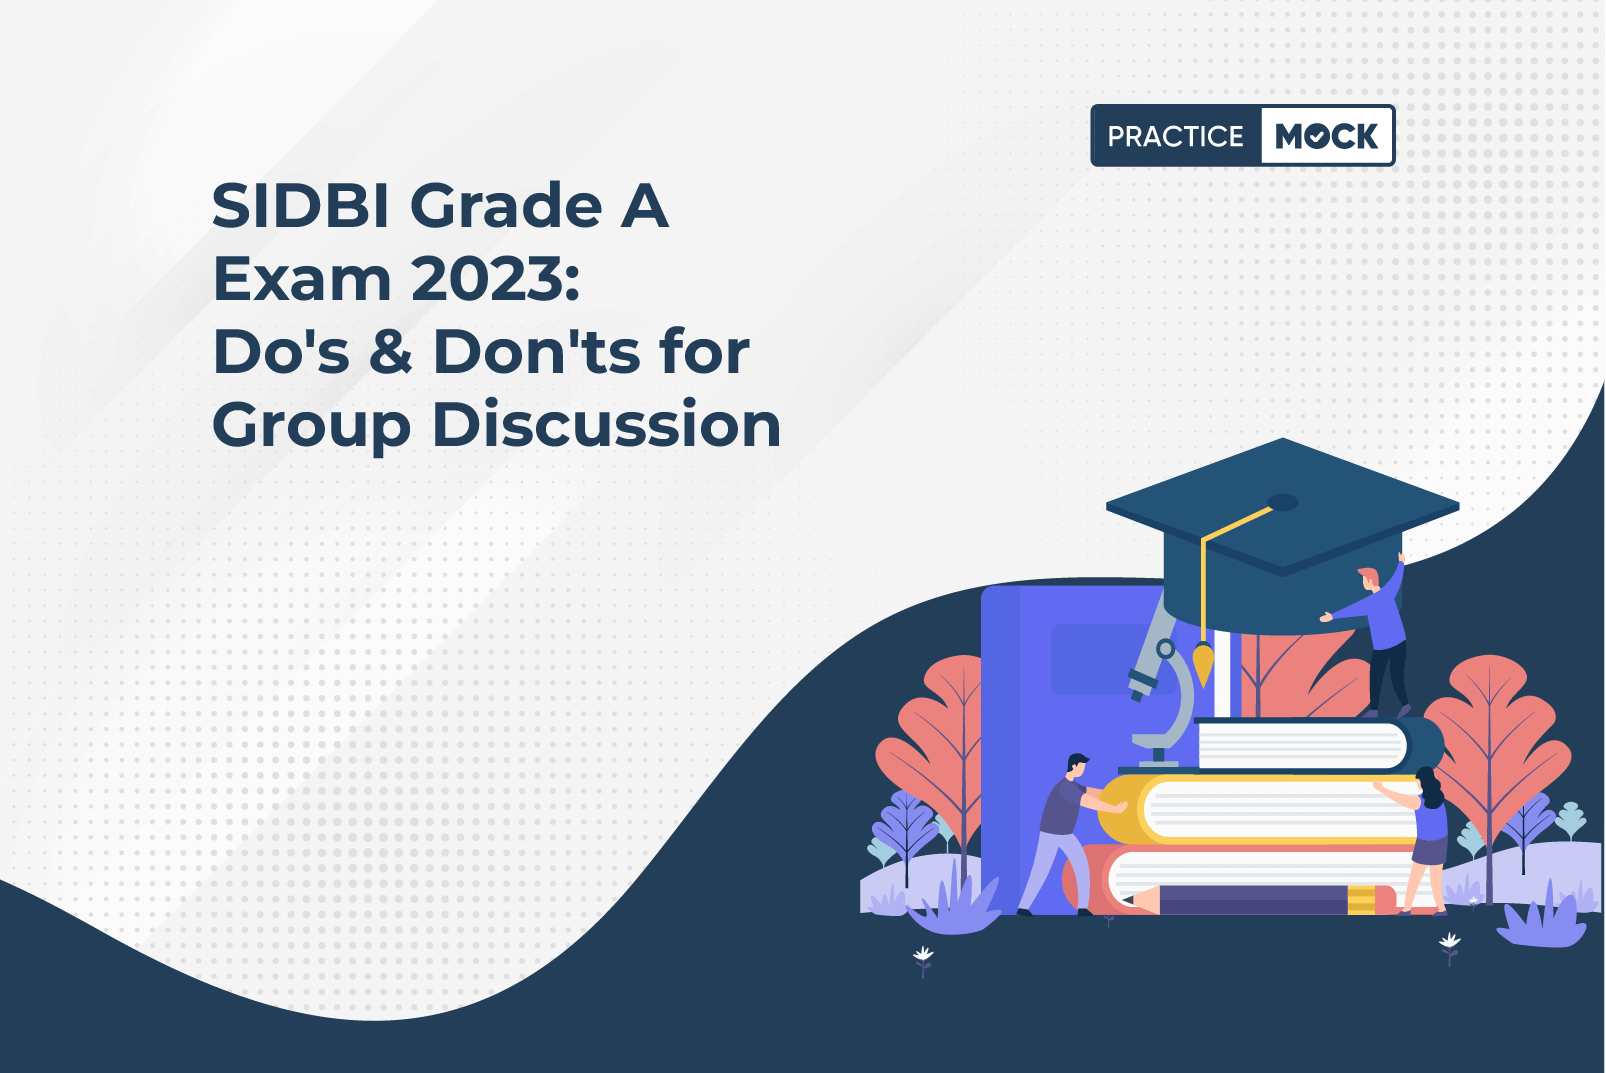 SIDBI Grade A Exam 2023 Do's & Don'ts for Group Discussion